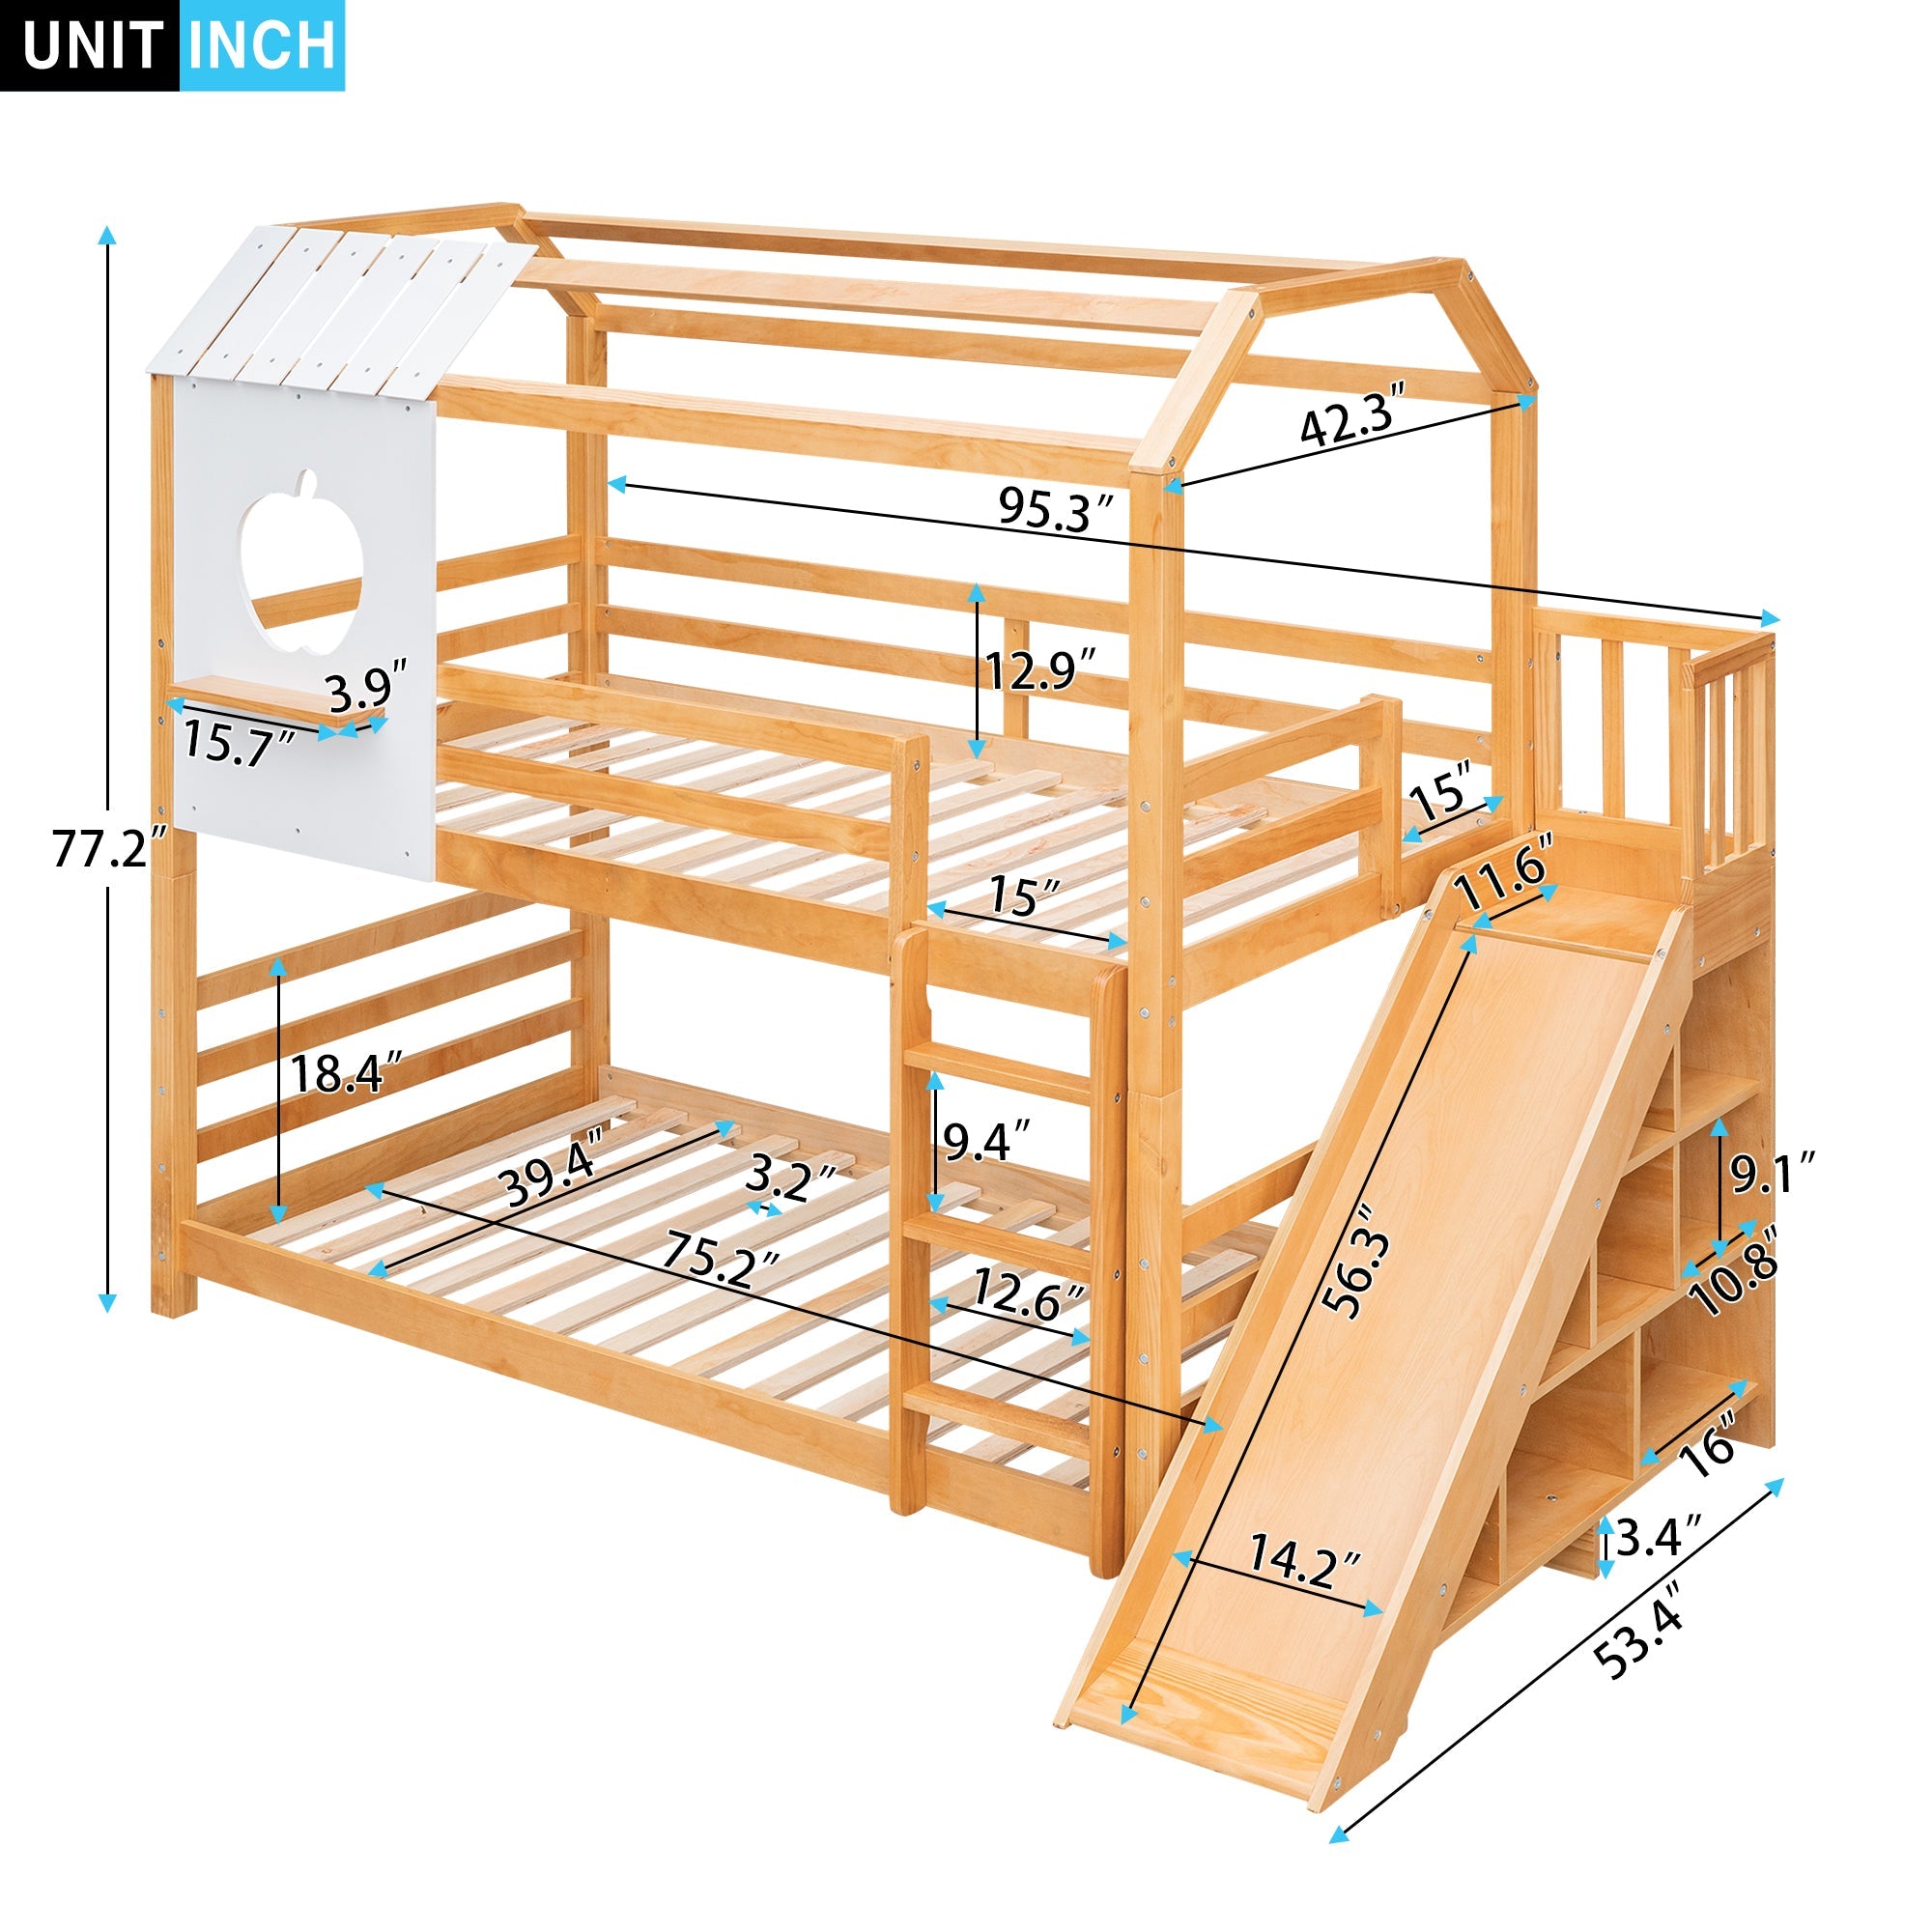 Twin Size House Bunk Bed with Slide and Shelf for Kids Bedroom, Natural